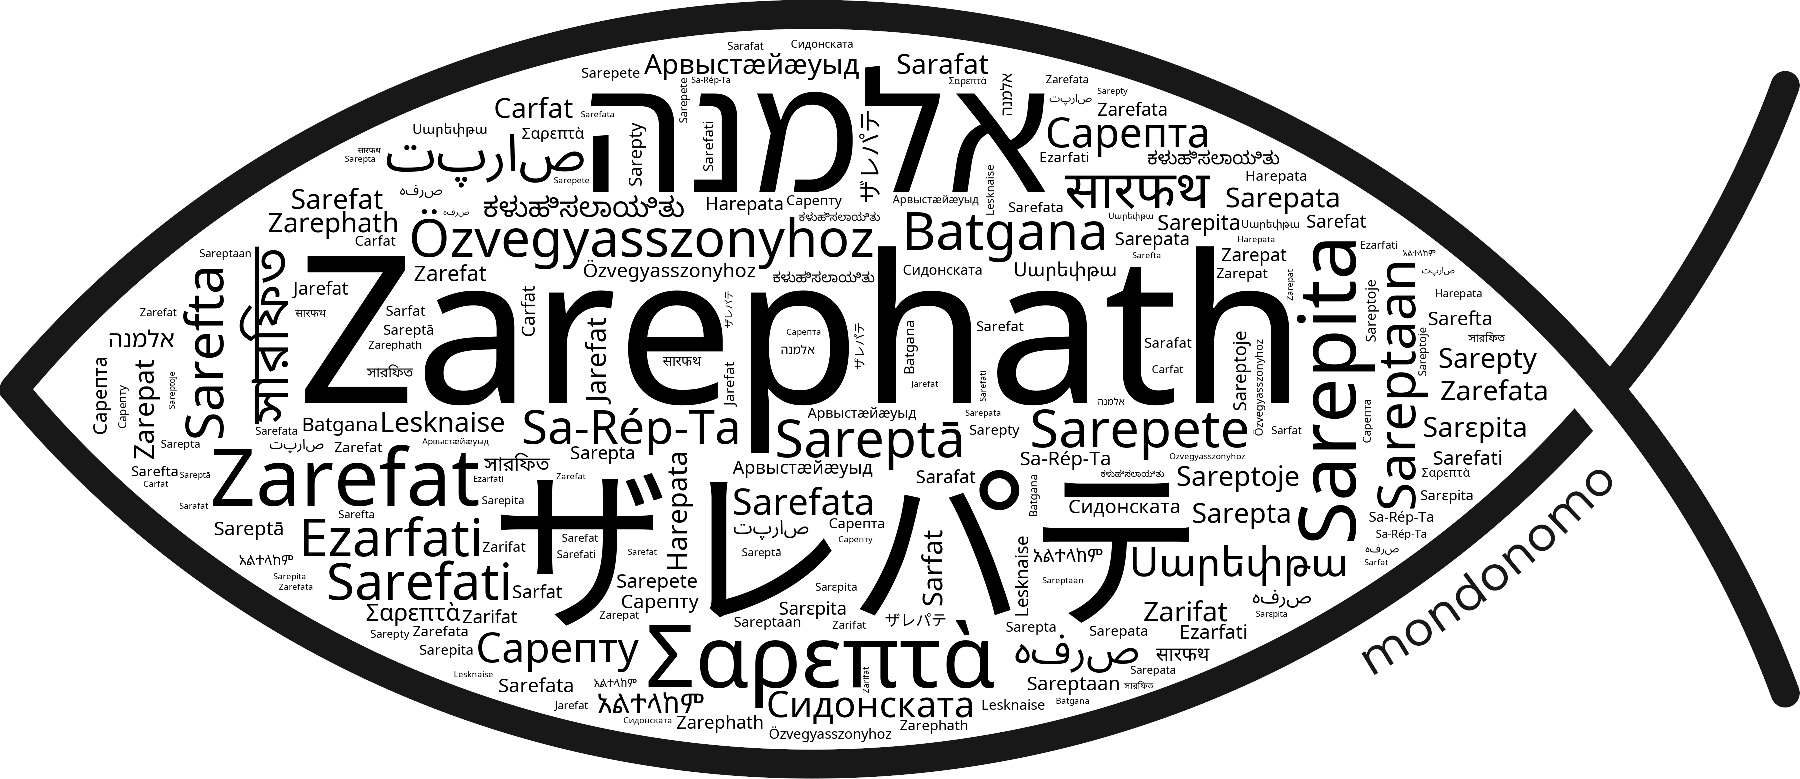 Name Zarephath in the world's Bibles